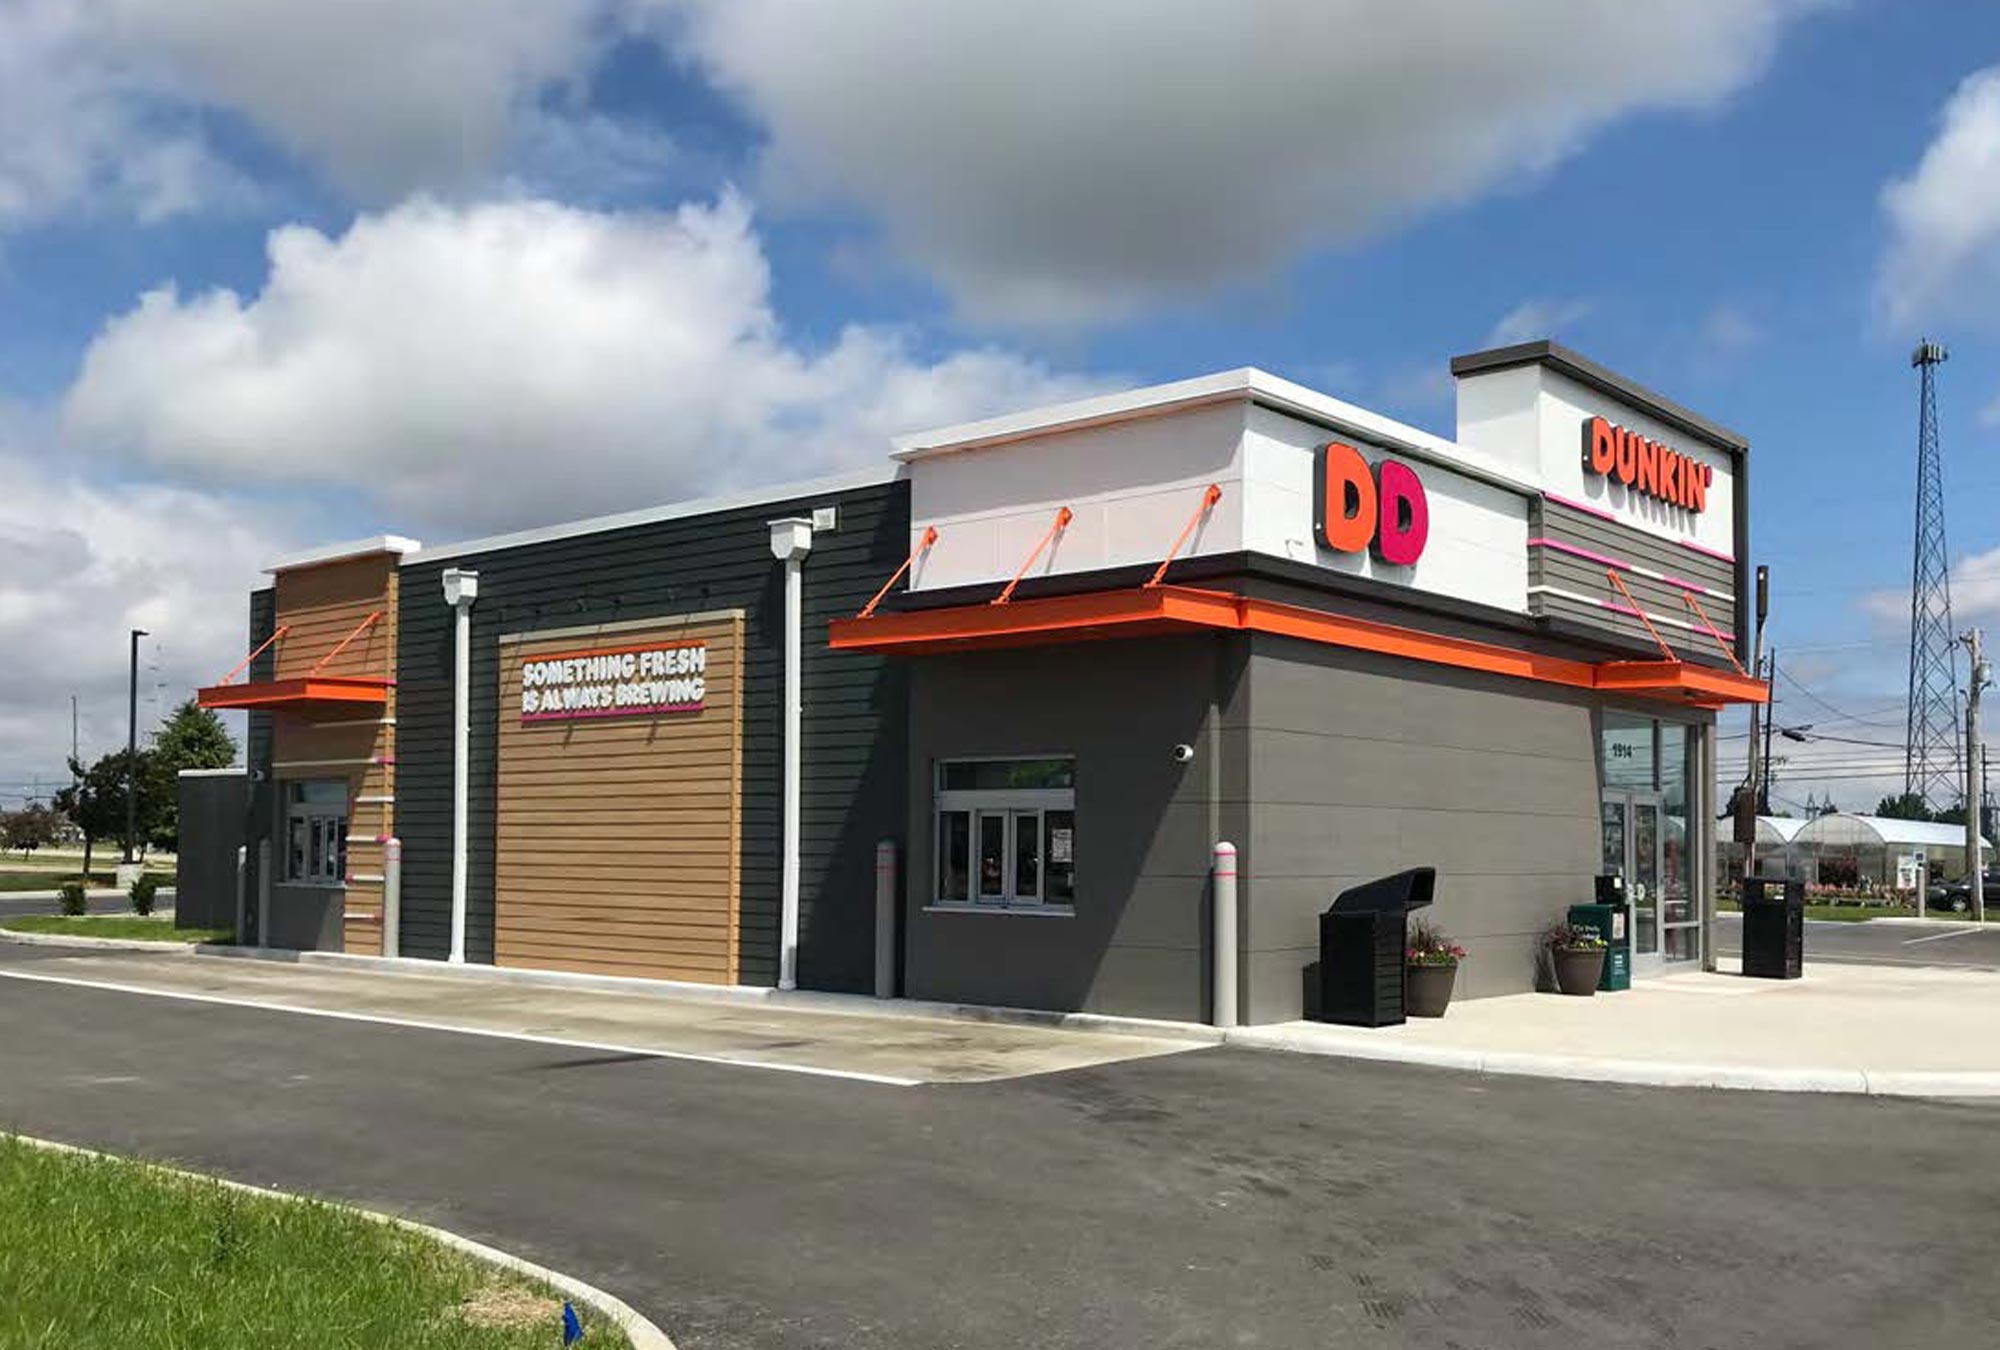 Top Construction Contractors Dunkin' Drive Thru - Celina, Ohio by Fred Olivieri